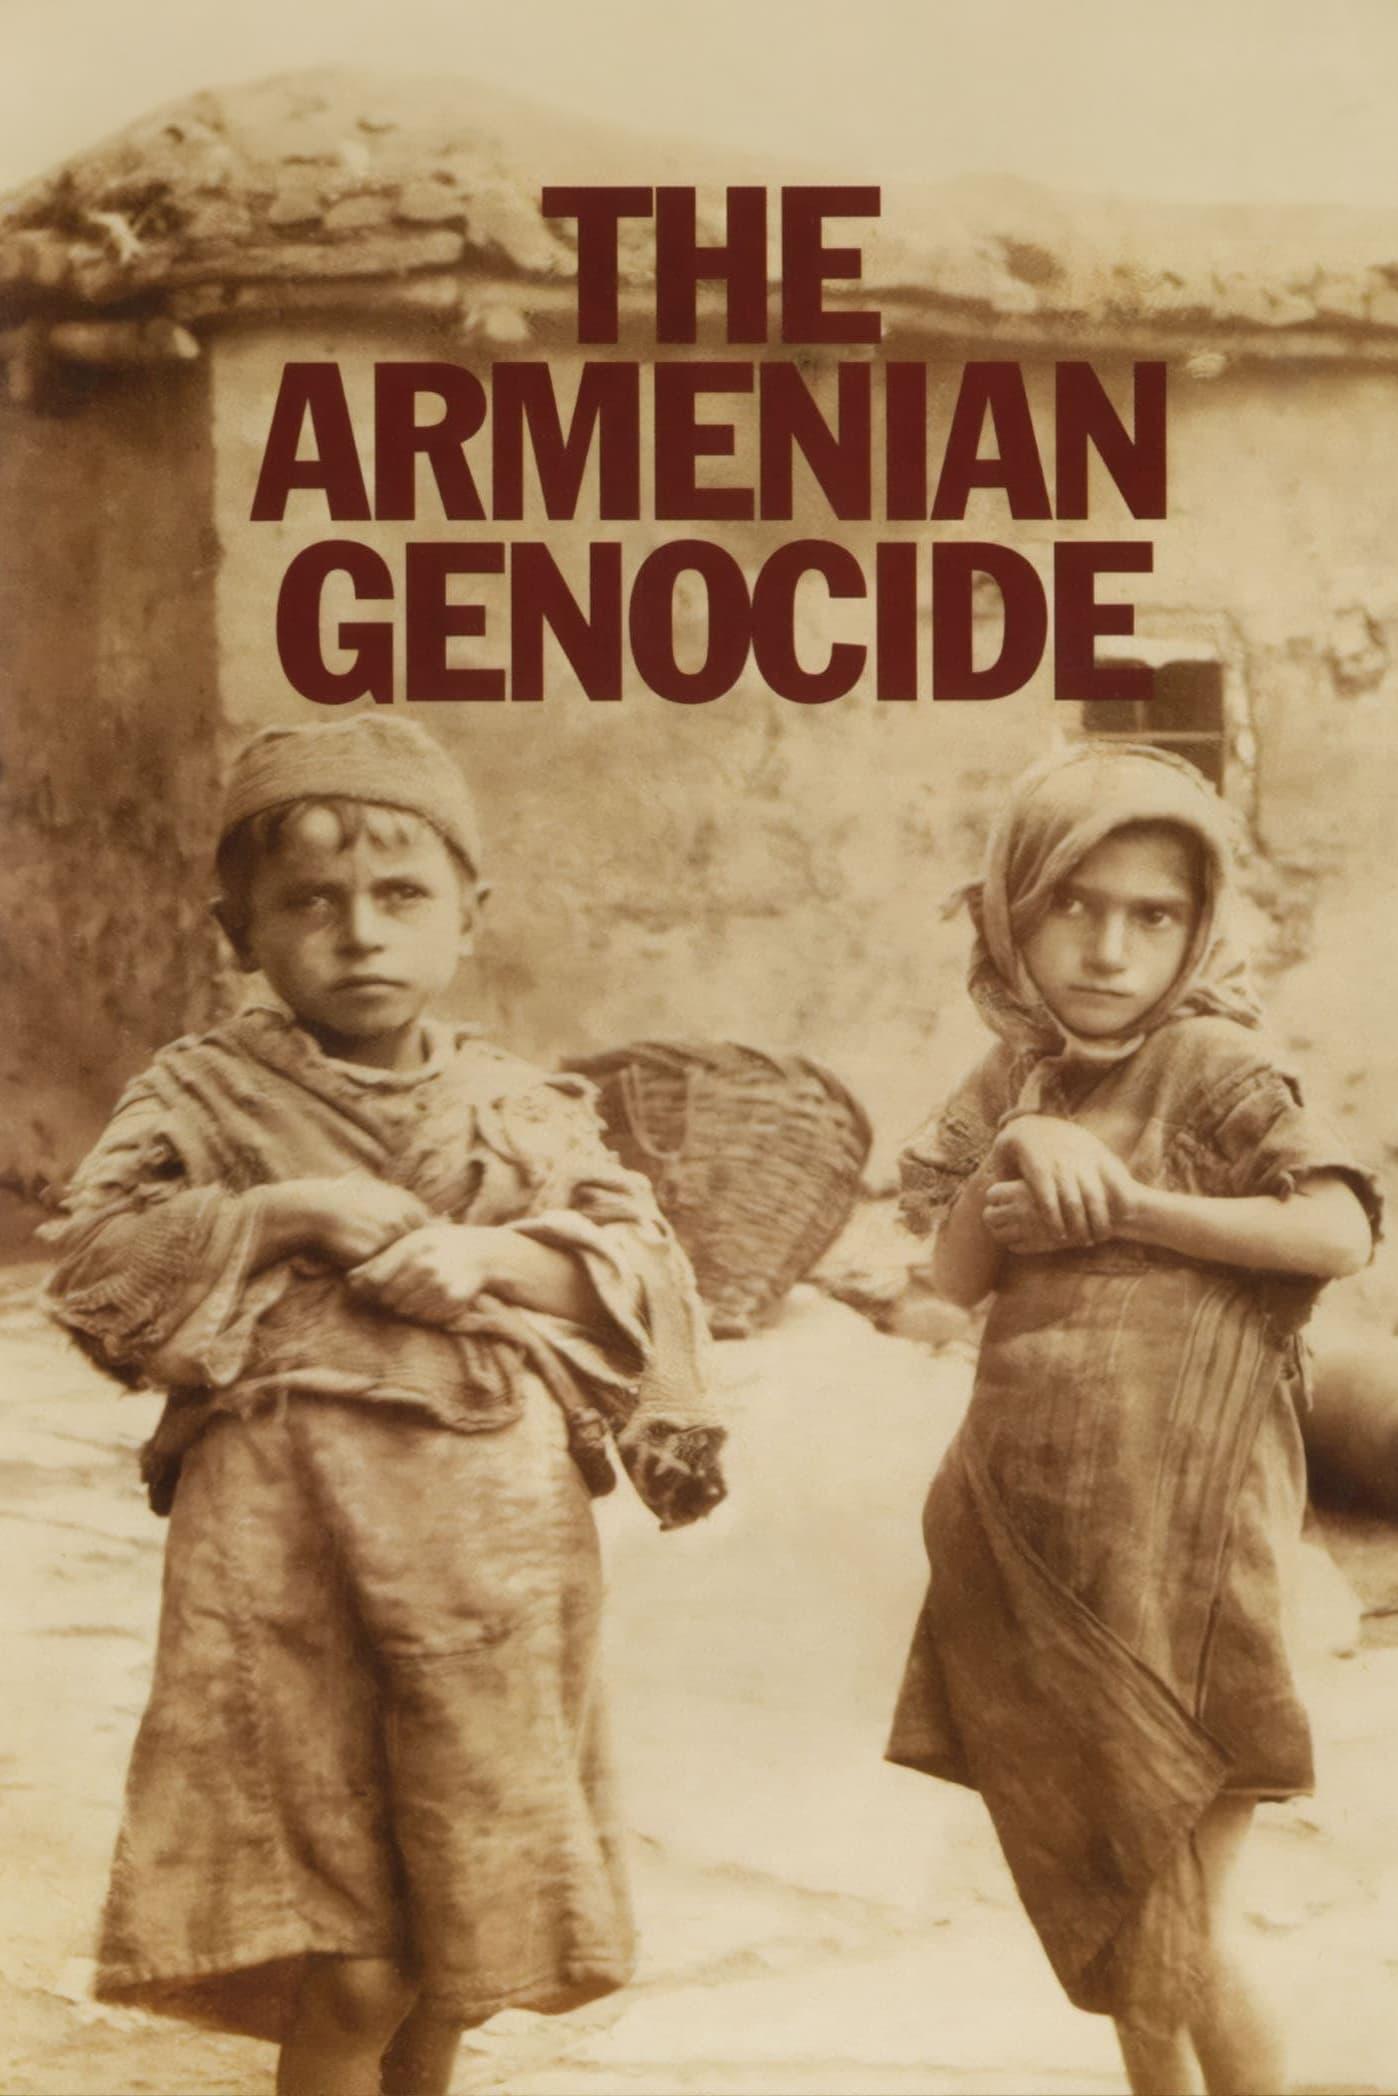 The Armenian Genocide poster